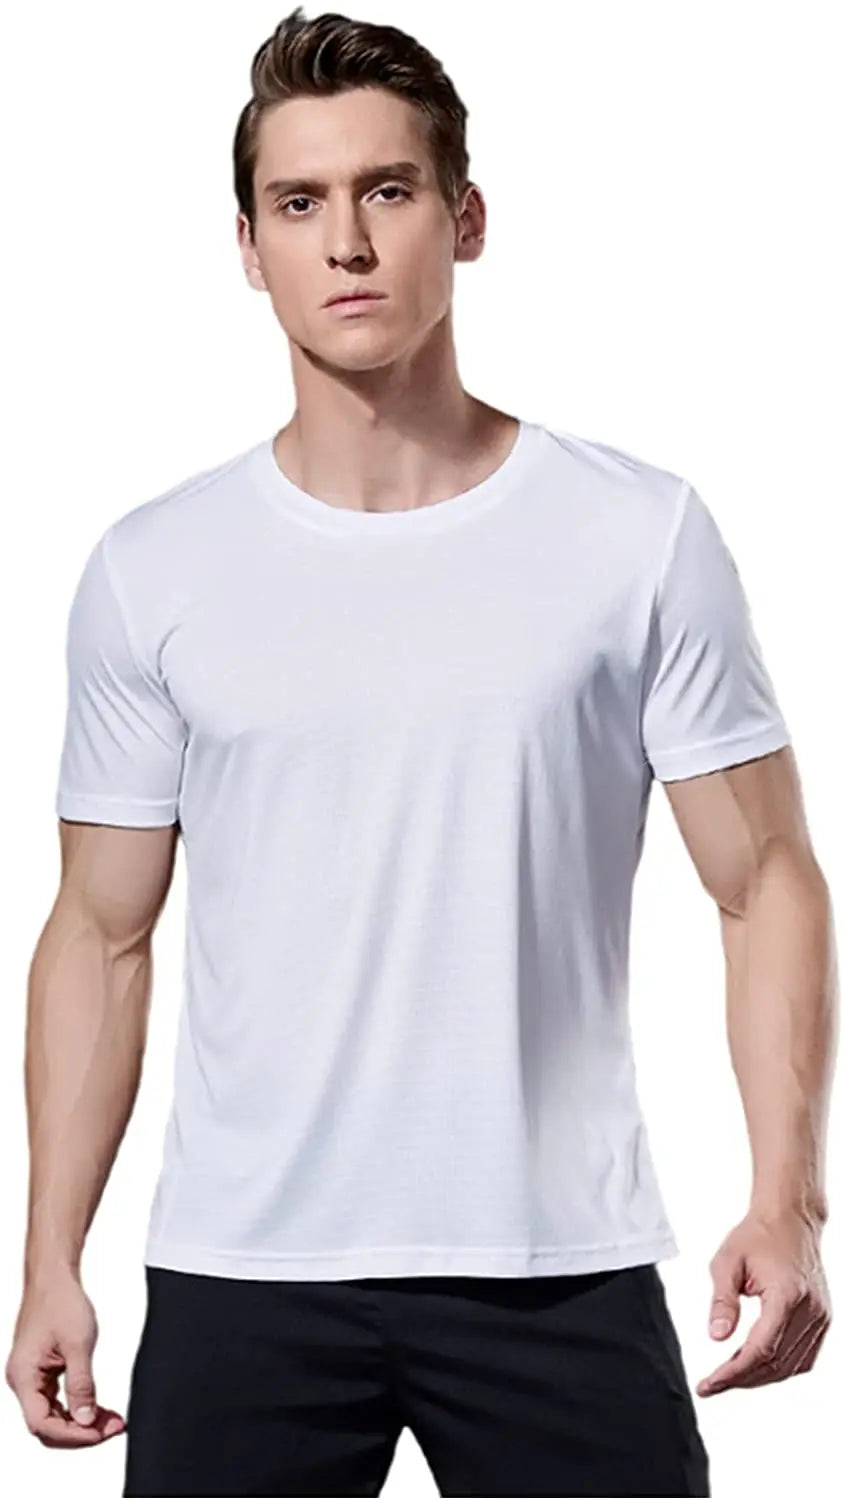 Findci Man's Cool Dry Moisture Wicking Short-Sleeve Mesh Athletic Lightweight Breathable - TaMNz